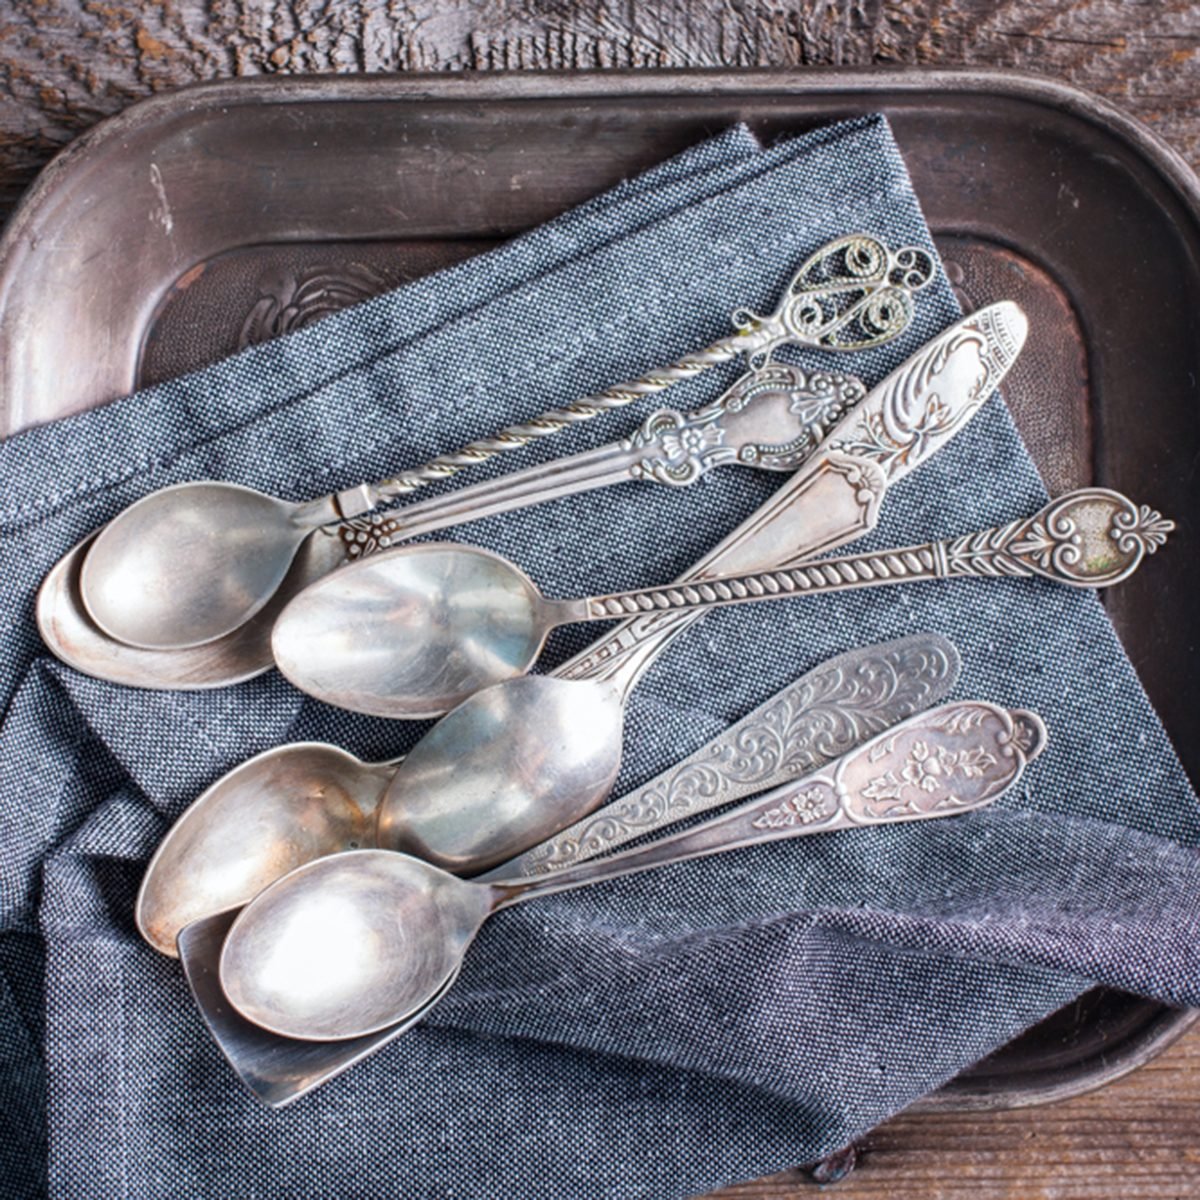 How To Use Milk To Polish Your Silverware To A Perfect Sheen